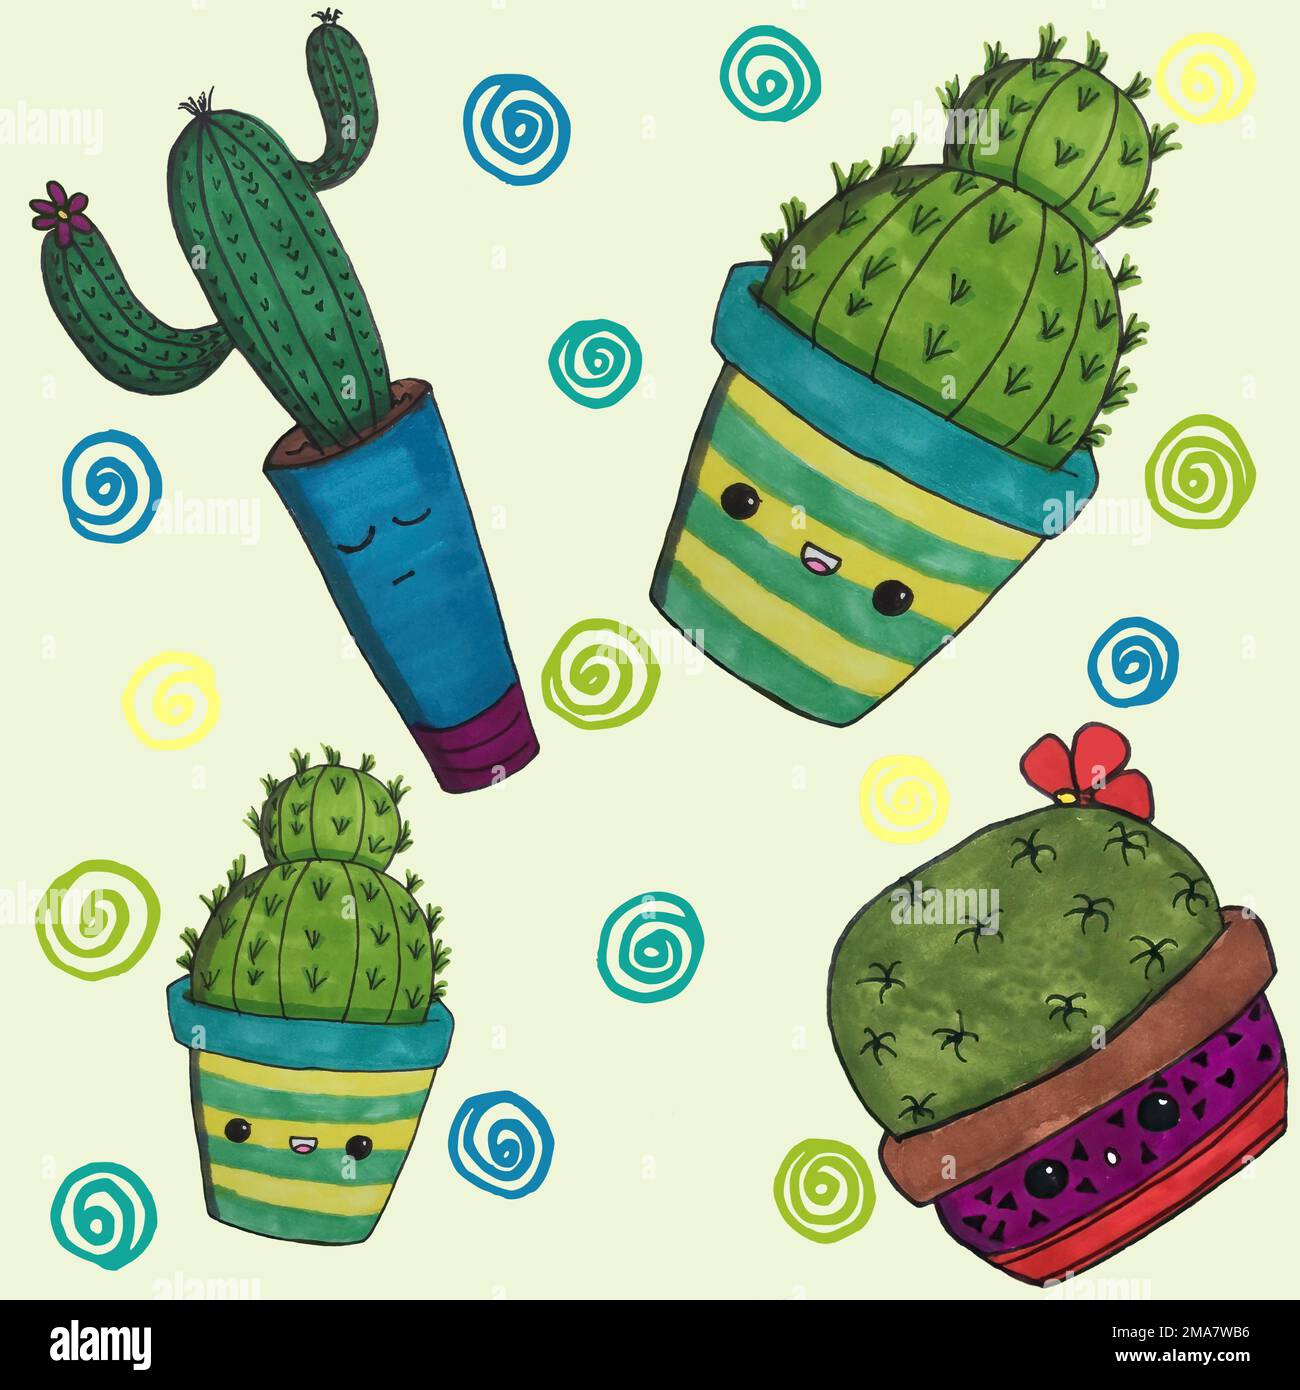 Hand drawn cactus plants seamless pattern. Vibrant colors. Cute kids drawing. Stock Photo